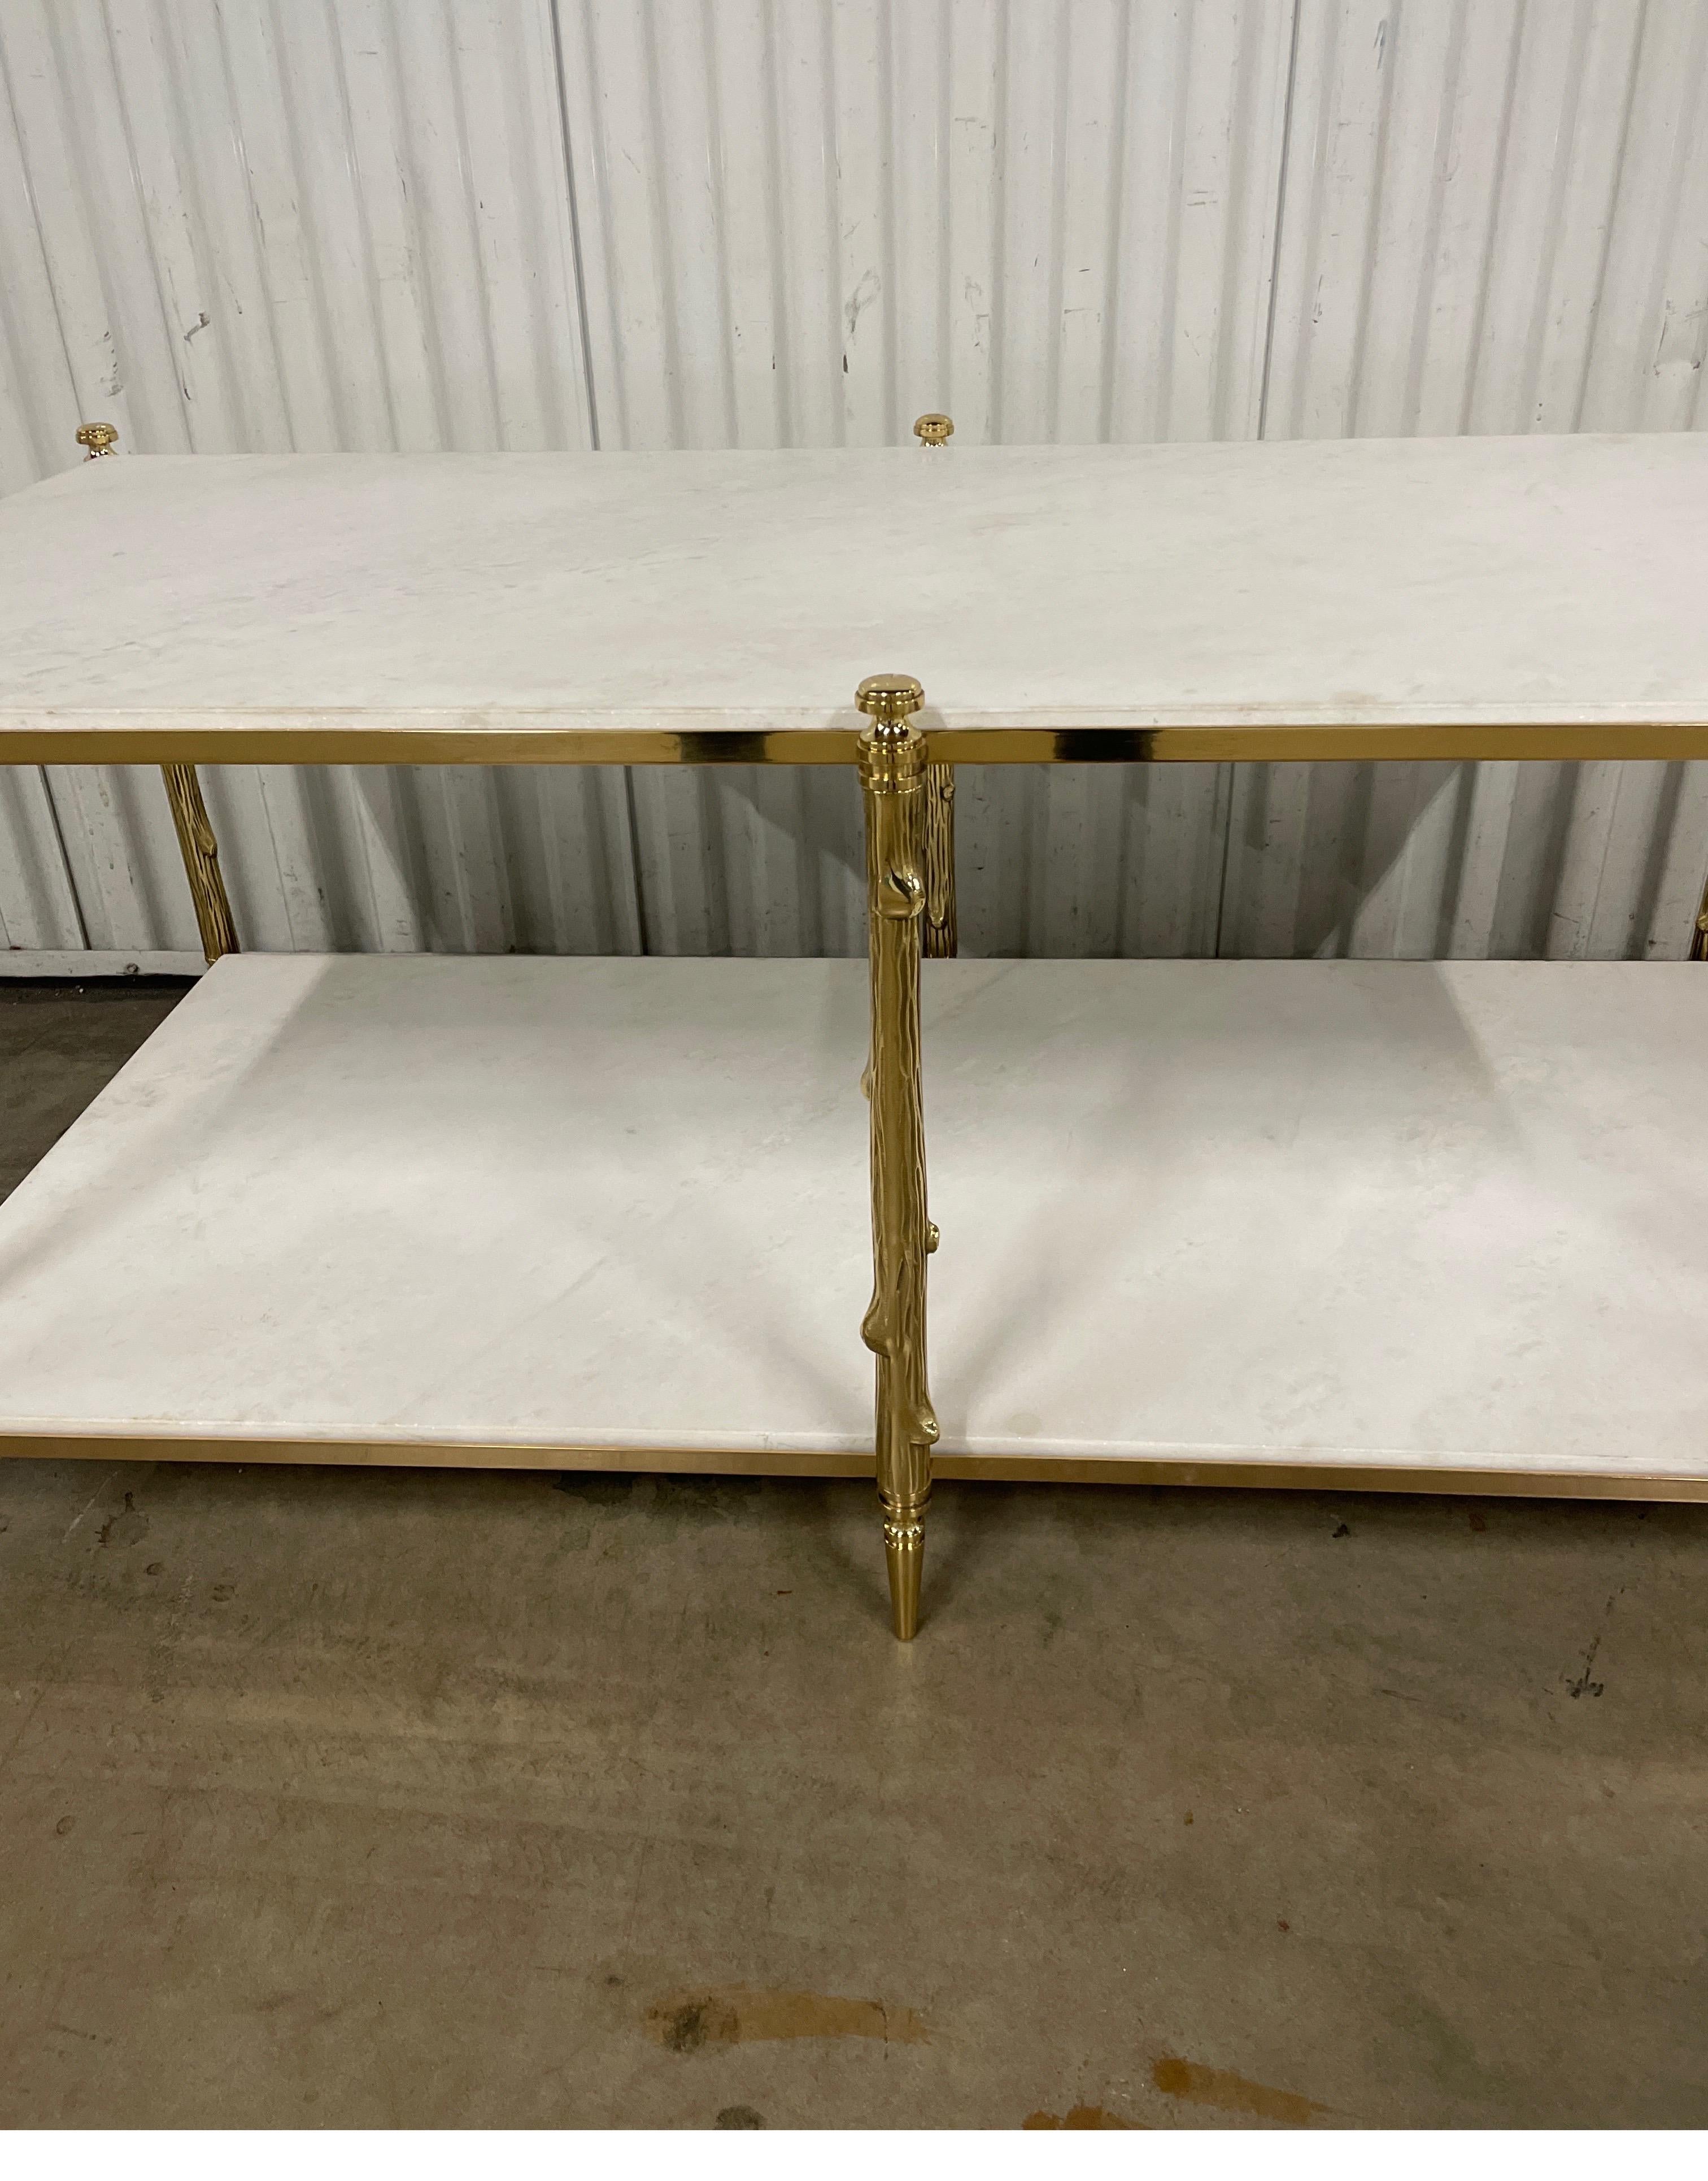 Brass Faux Bois two tiered coffee / cocktail table with honed white marble.
A classic and timeless beauty.